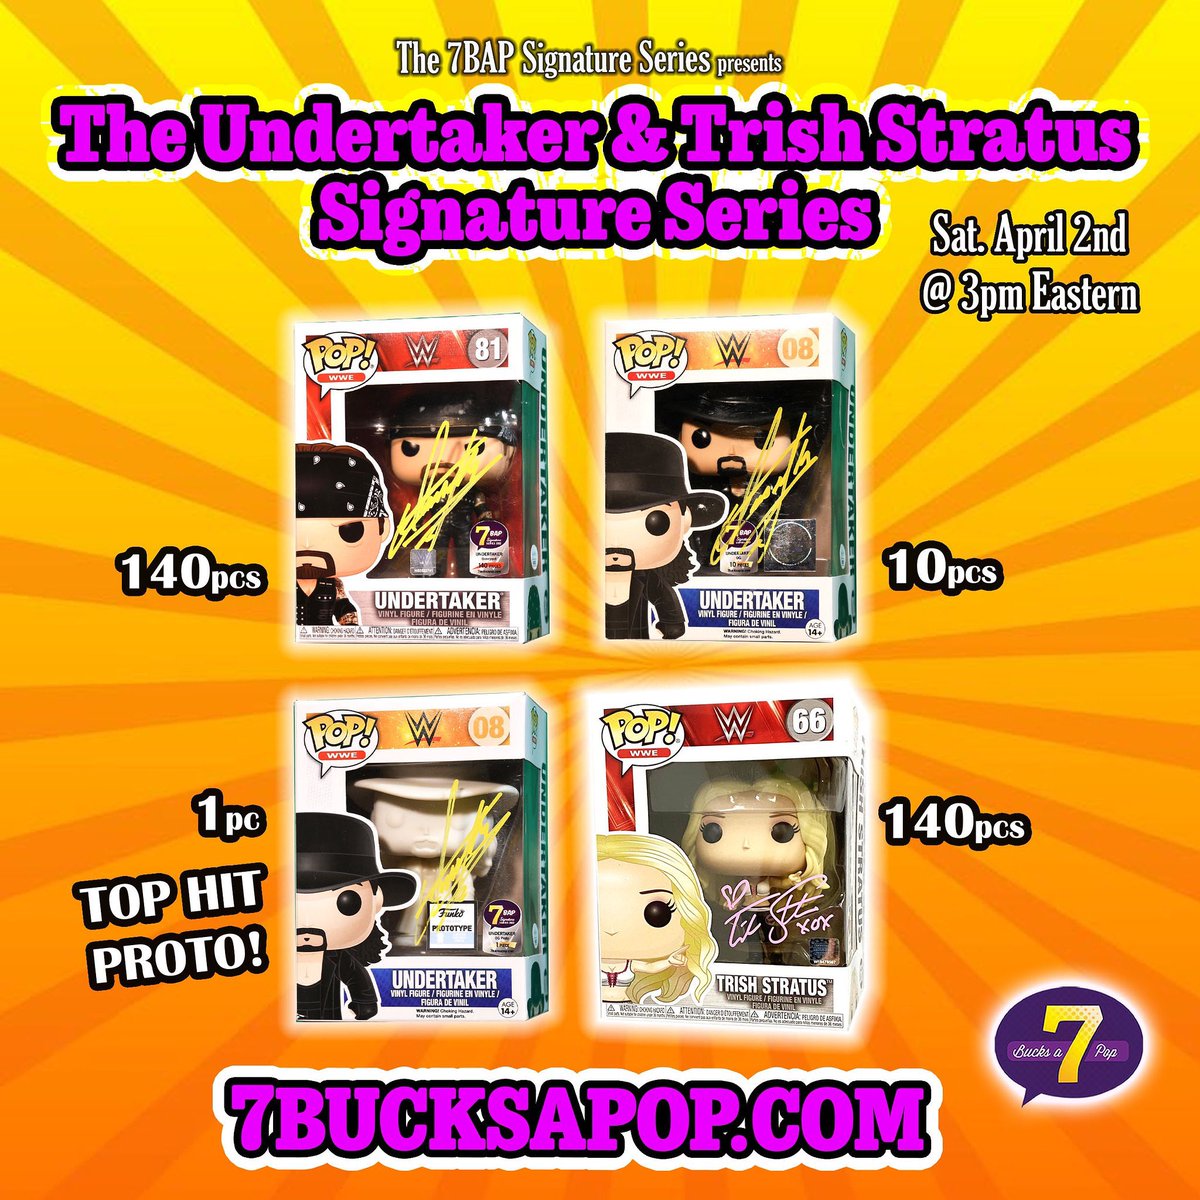 Available Now: 7BAPSignatureSeries - Wrestling Signature Series - Trish Stratus and The Undertaker! #Ad 

https://t.co/edAGOod3wI https://t.co/vQgyb3O8W8